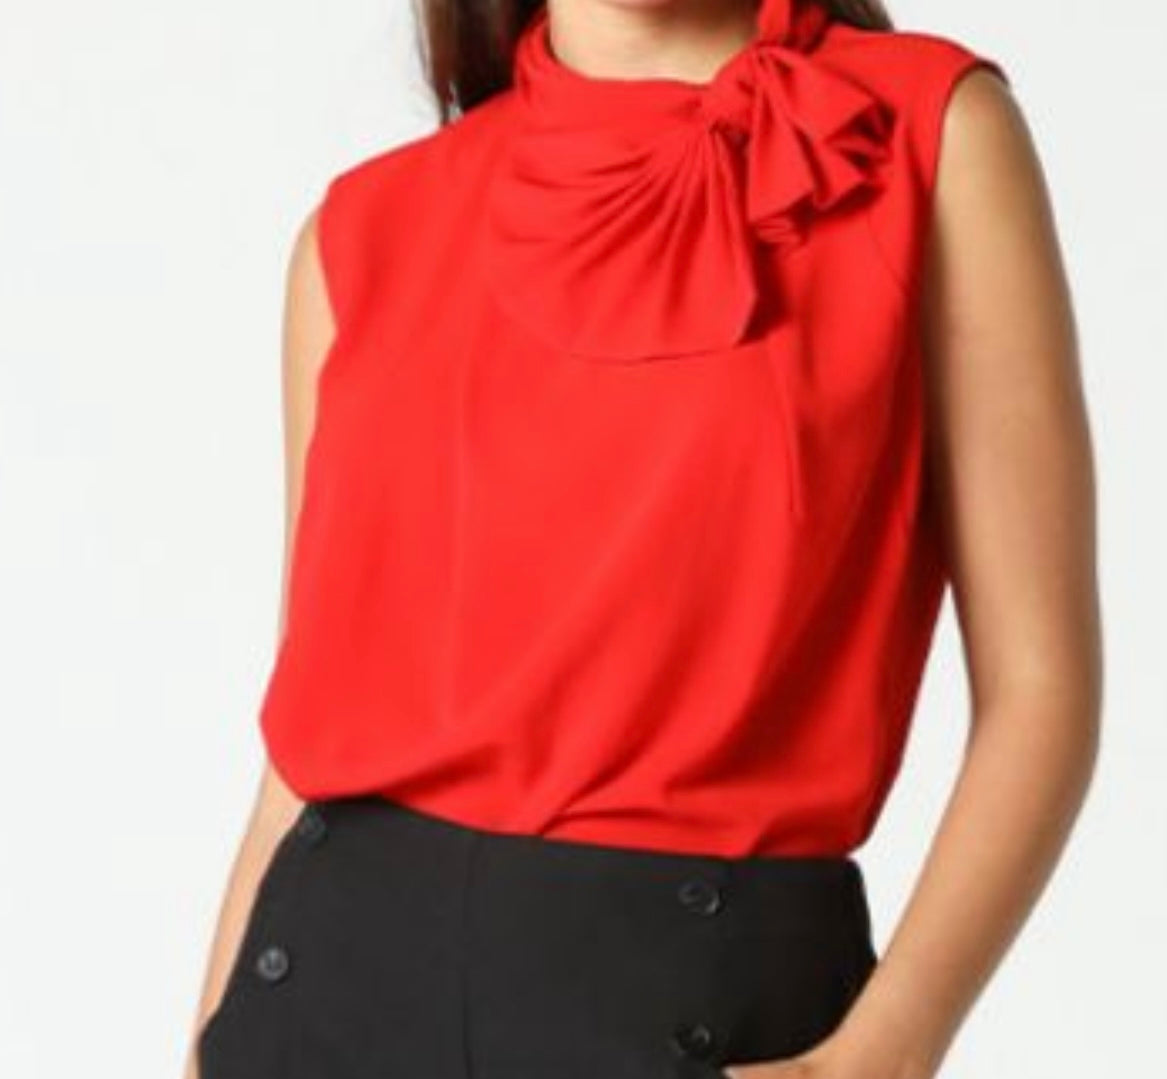 Red Bow Top